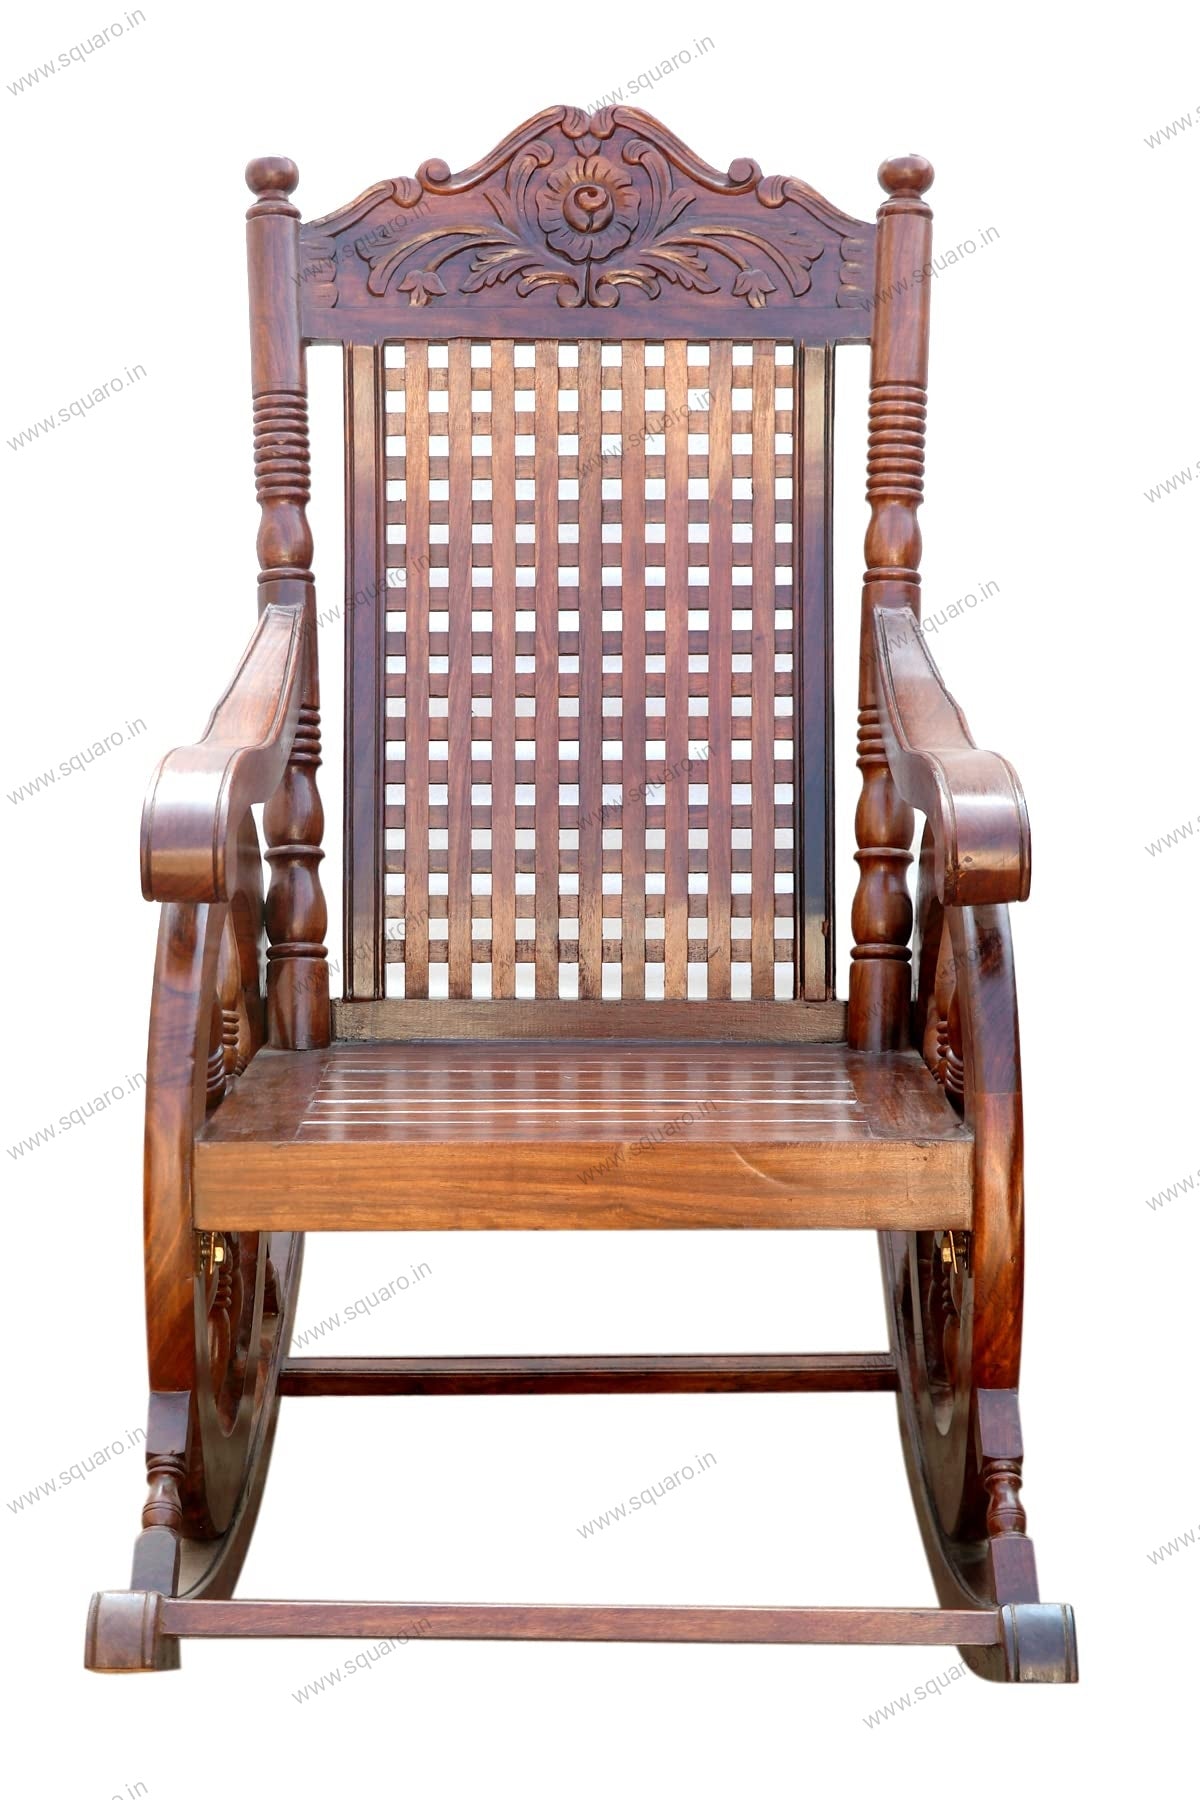 Sheesham Handcrafted Wooden Rocking Chair Wooden armrest Chair with Back Support for Living Room (Premium)